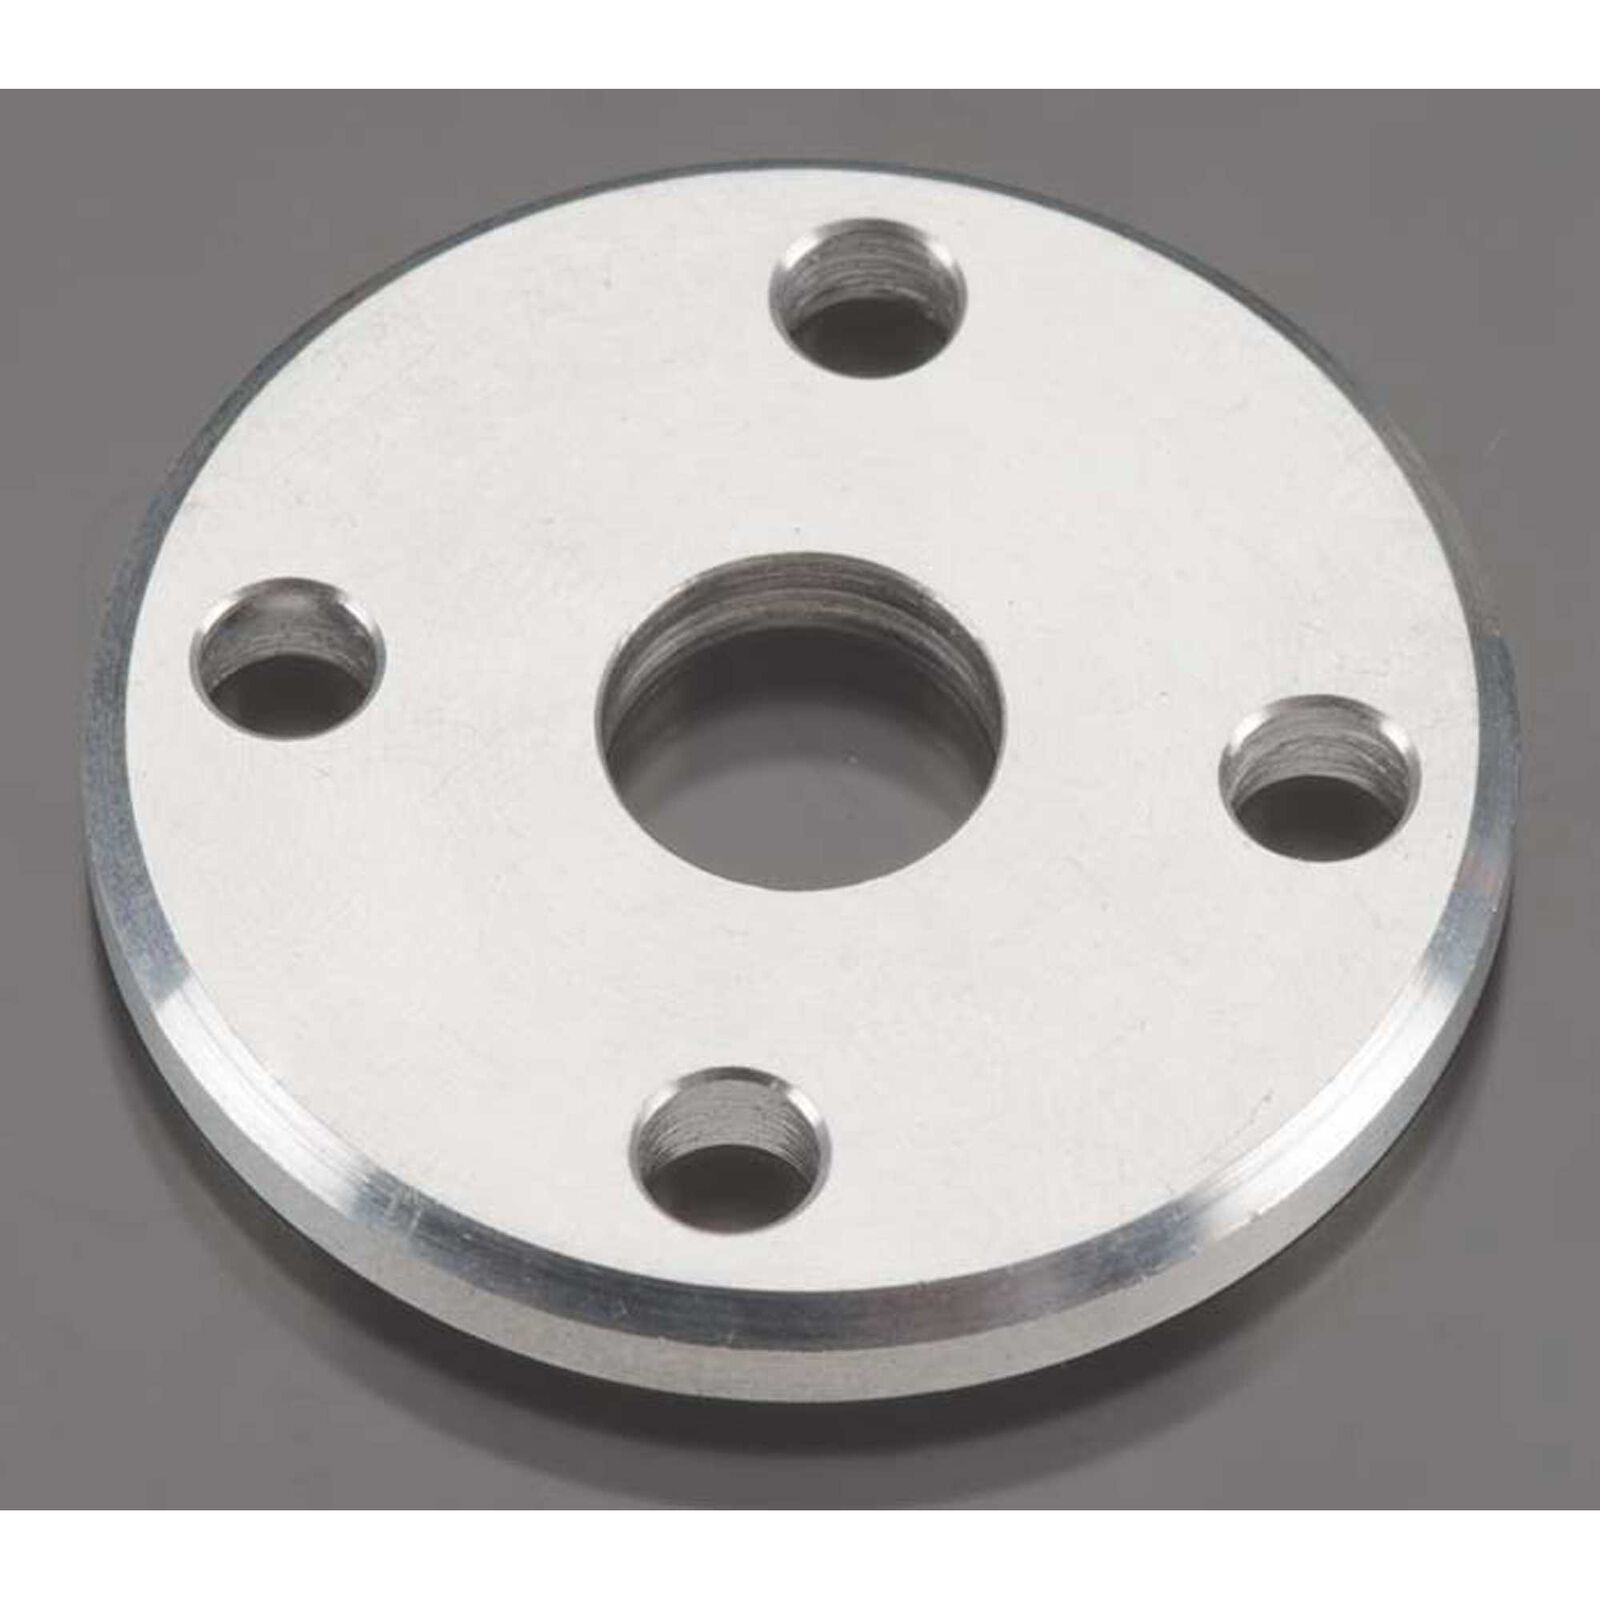 Propeller Drive Hub Washer: DLE-30